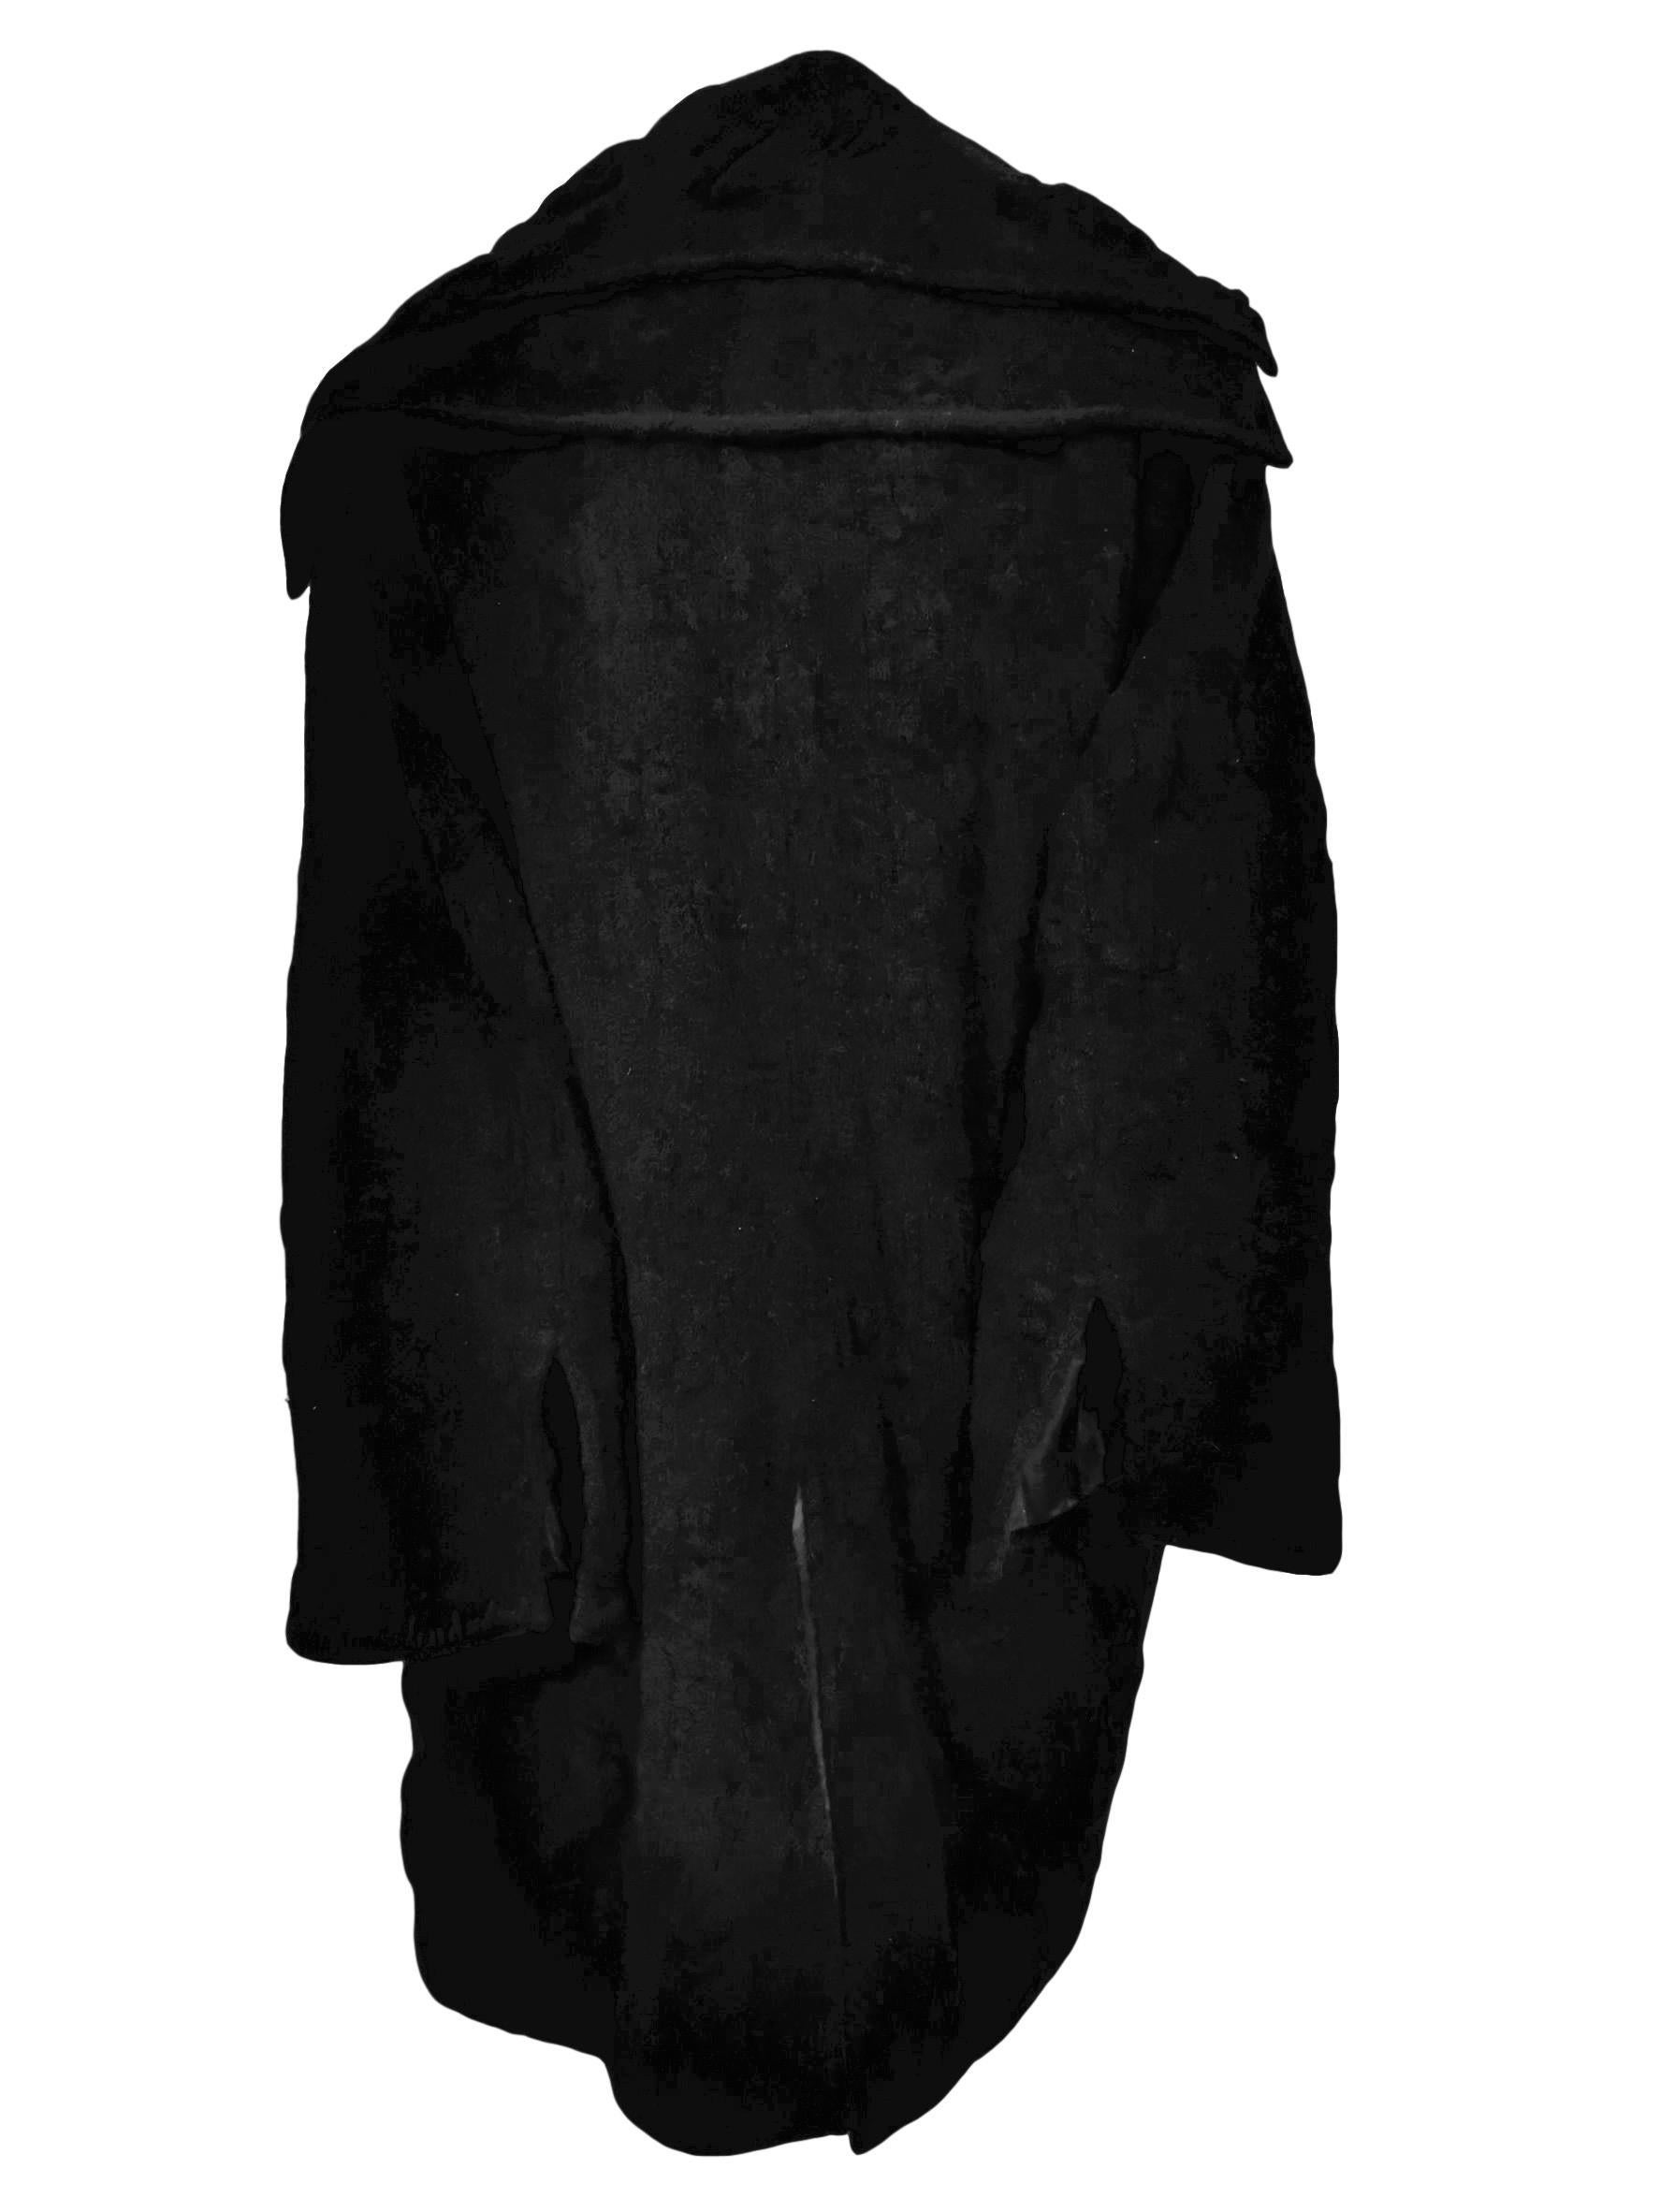 Black John Galliano Fall/Winter 2000 Oversize Slouchy Textured Wool and Mohair Coat For Sale